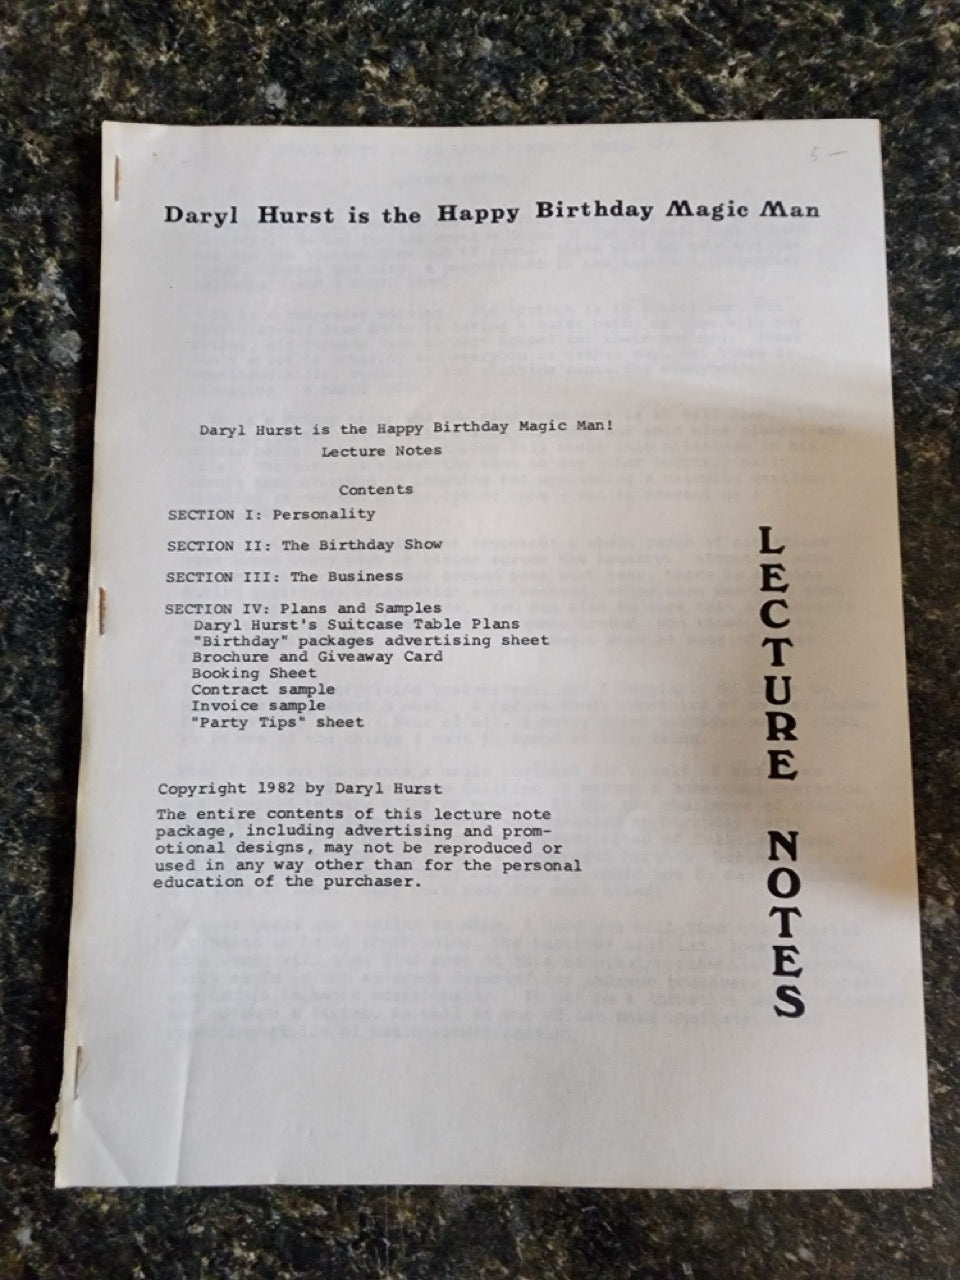 Daryl Hurst is the Happy Birthday Magic Man - Daryl Hurst (Lecture Notes)